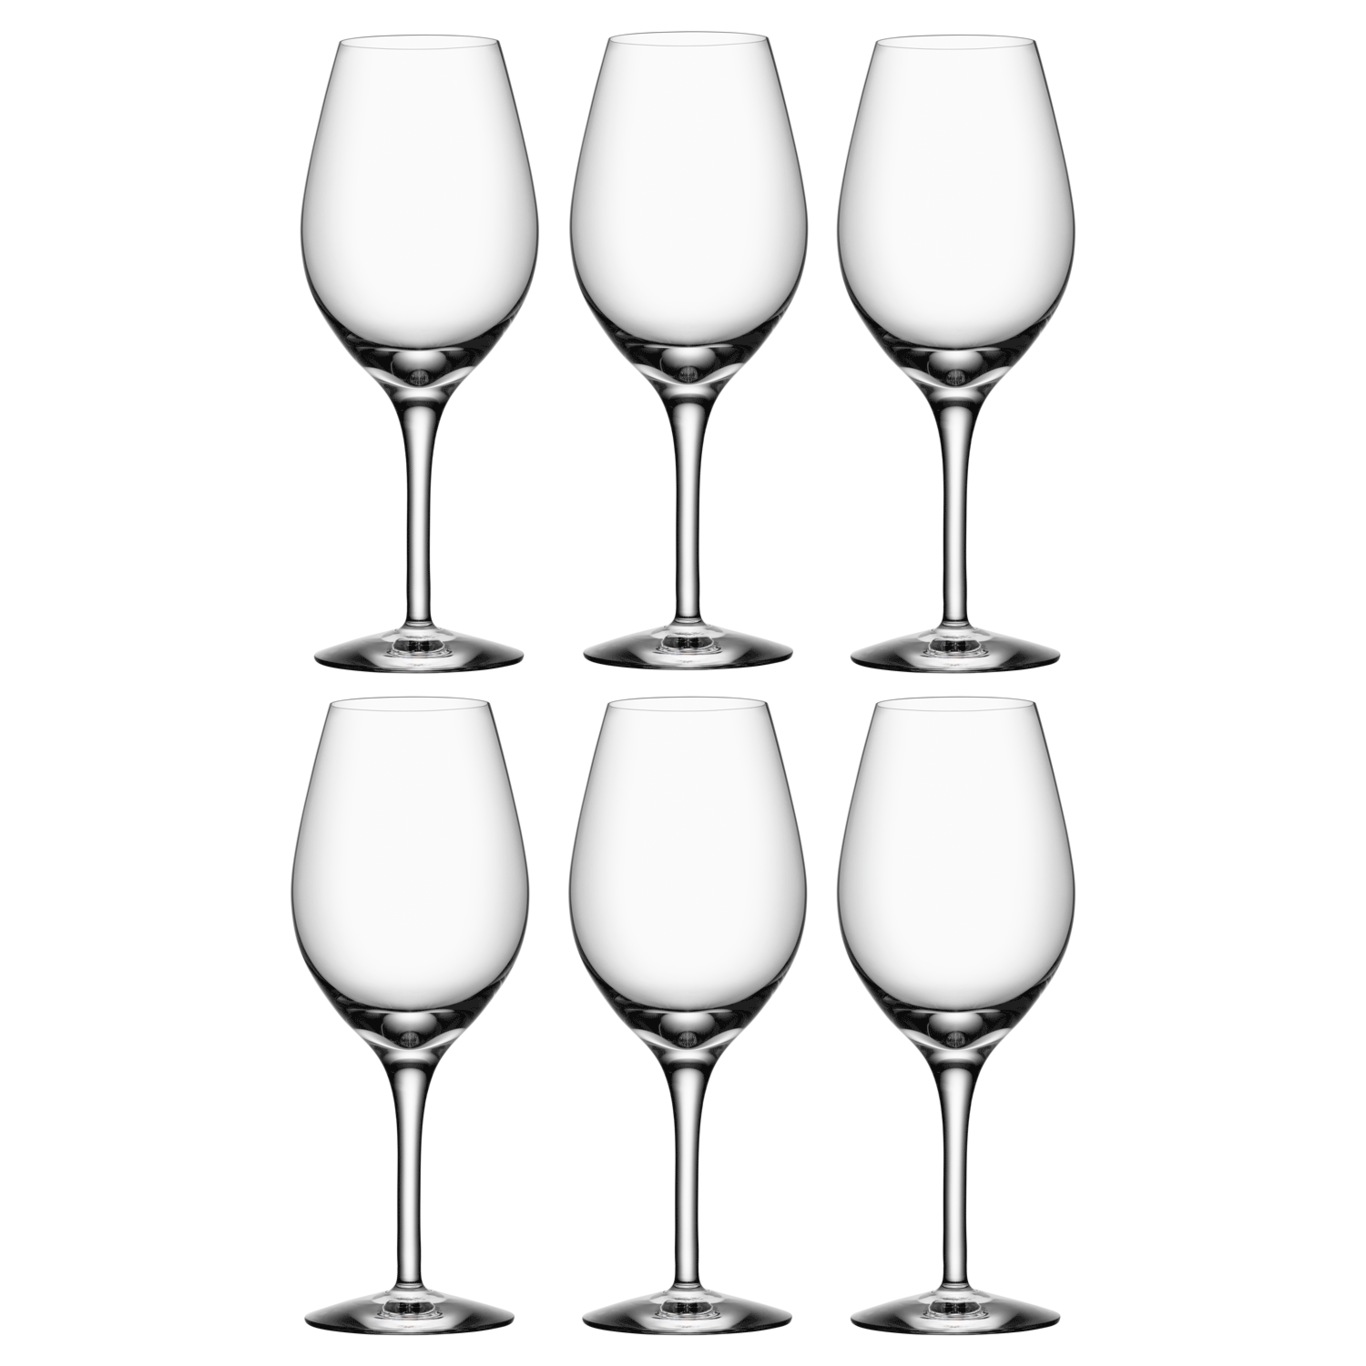 More Wine Glasses 44 cl, 6-pack